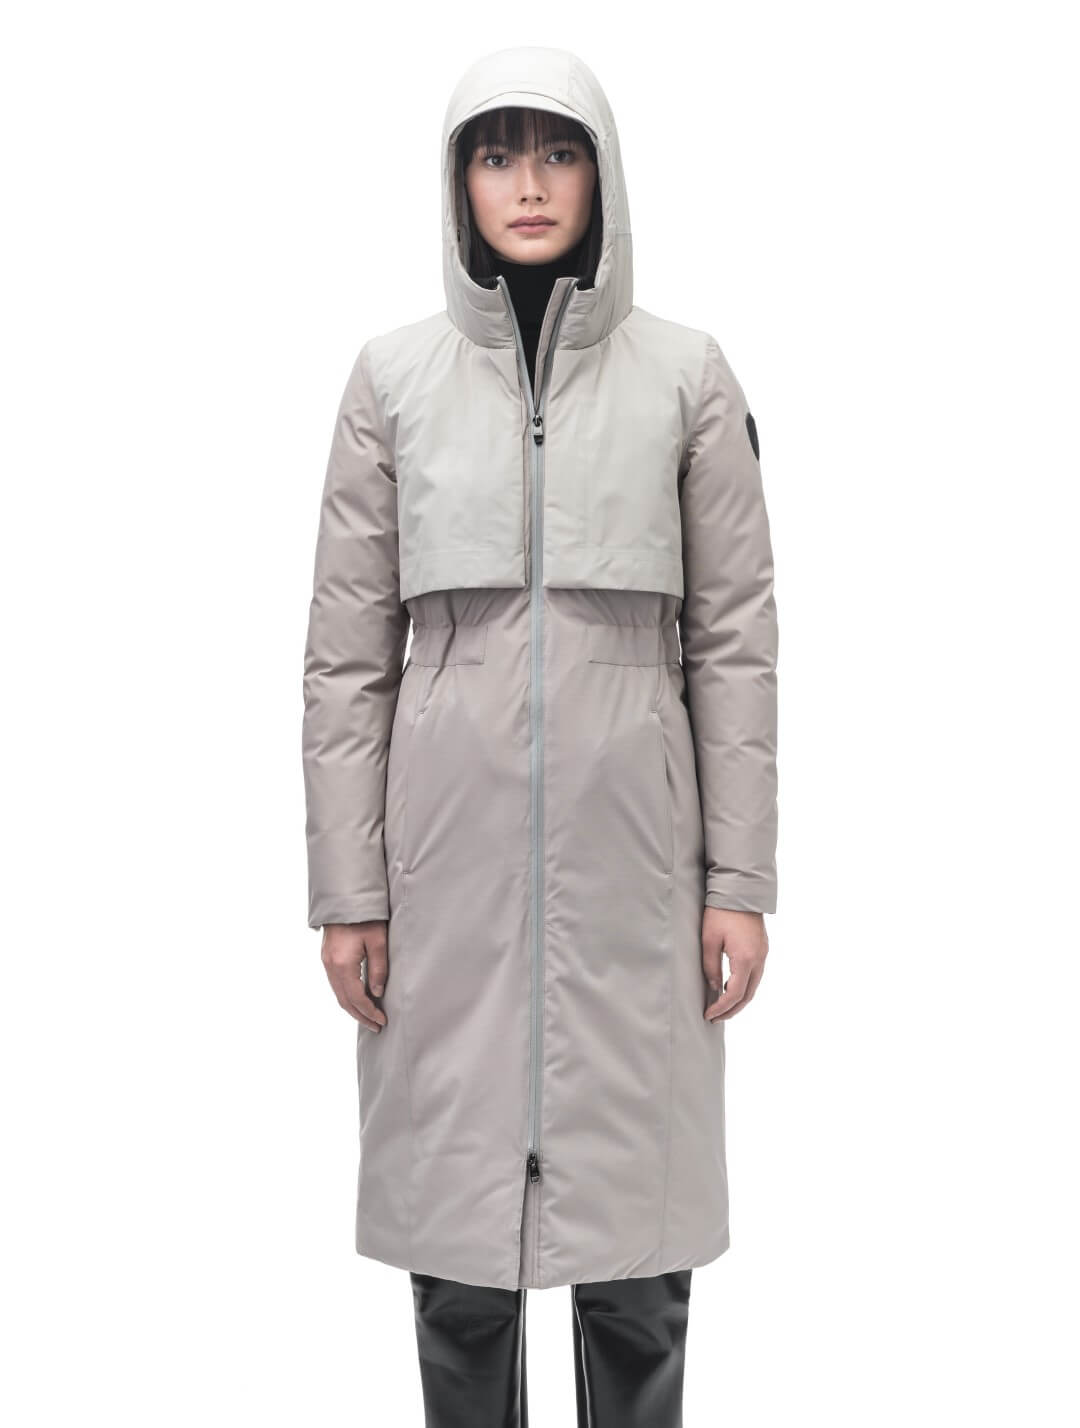 Iris Ladies Long Parka in below the knee length, Canadian duck down insulation, non-removable hood, and two-way zipper, in Clay